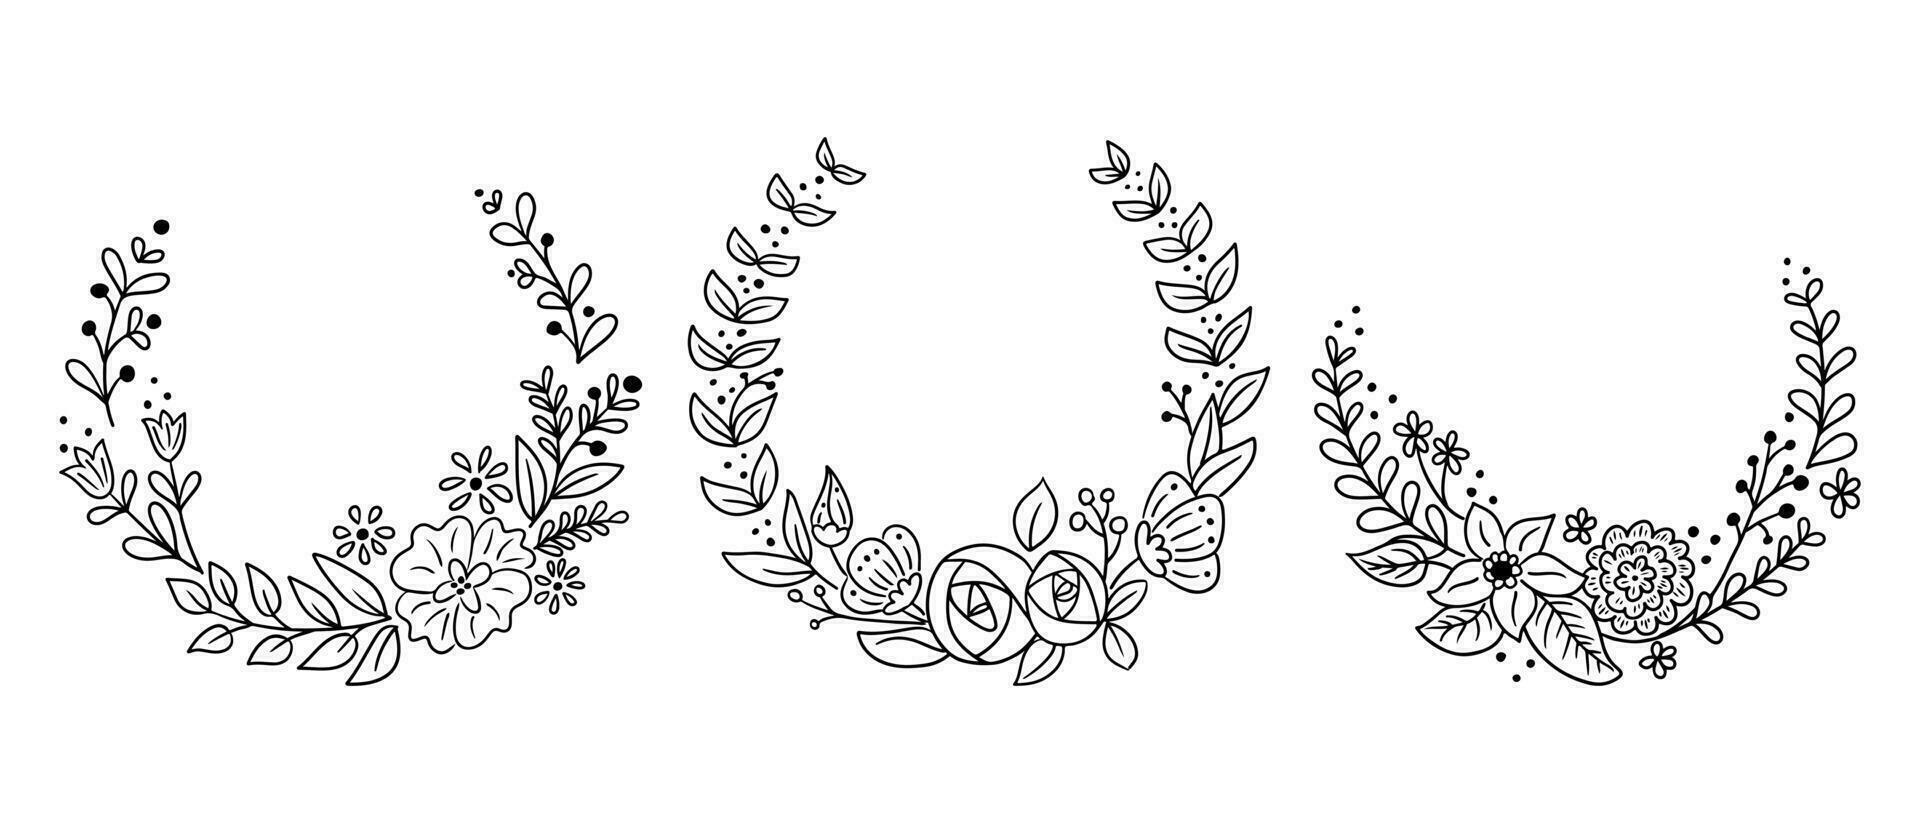 Romantic set of floral doodle wreaths or frames. Vector contour sketchy templates. Black outlines elements with flowers and leaves for for wedding, anniversary card, invitation on white background